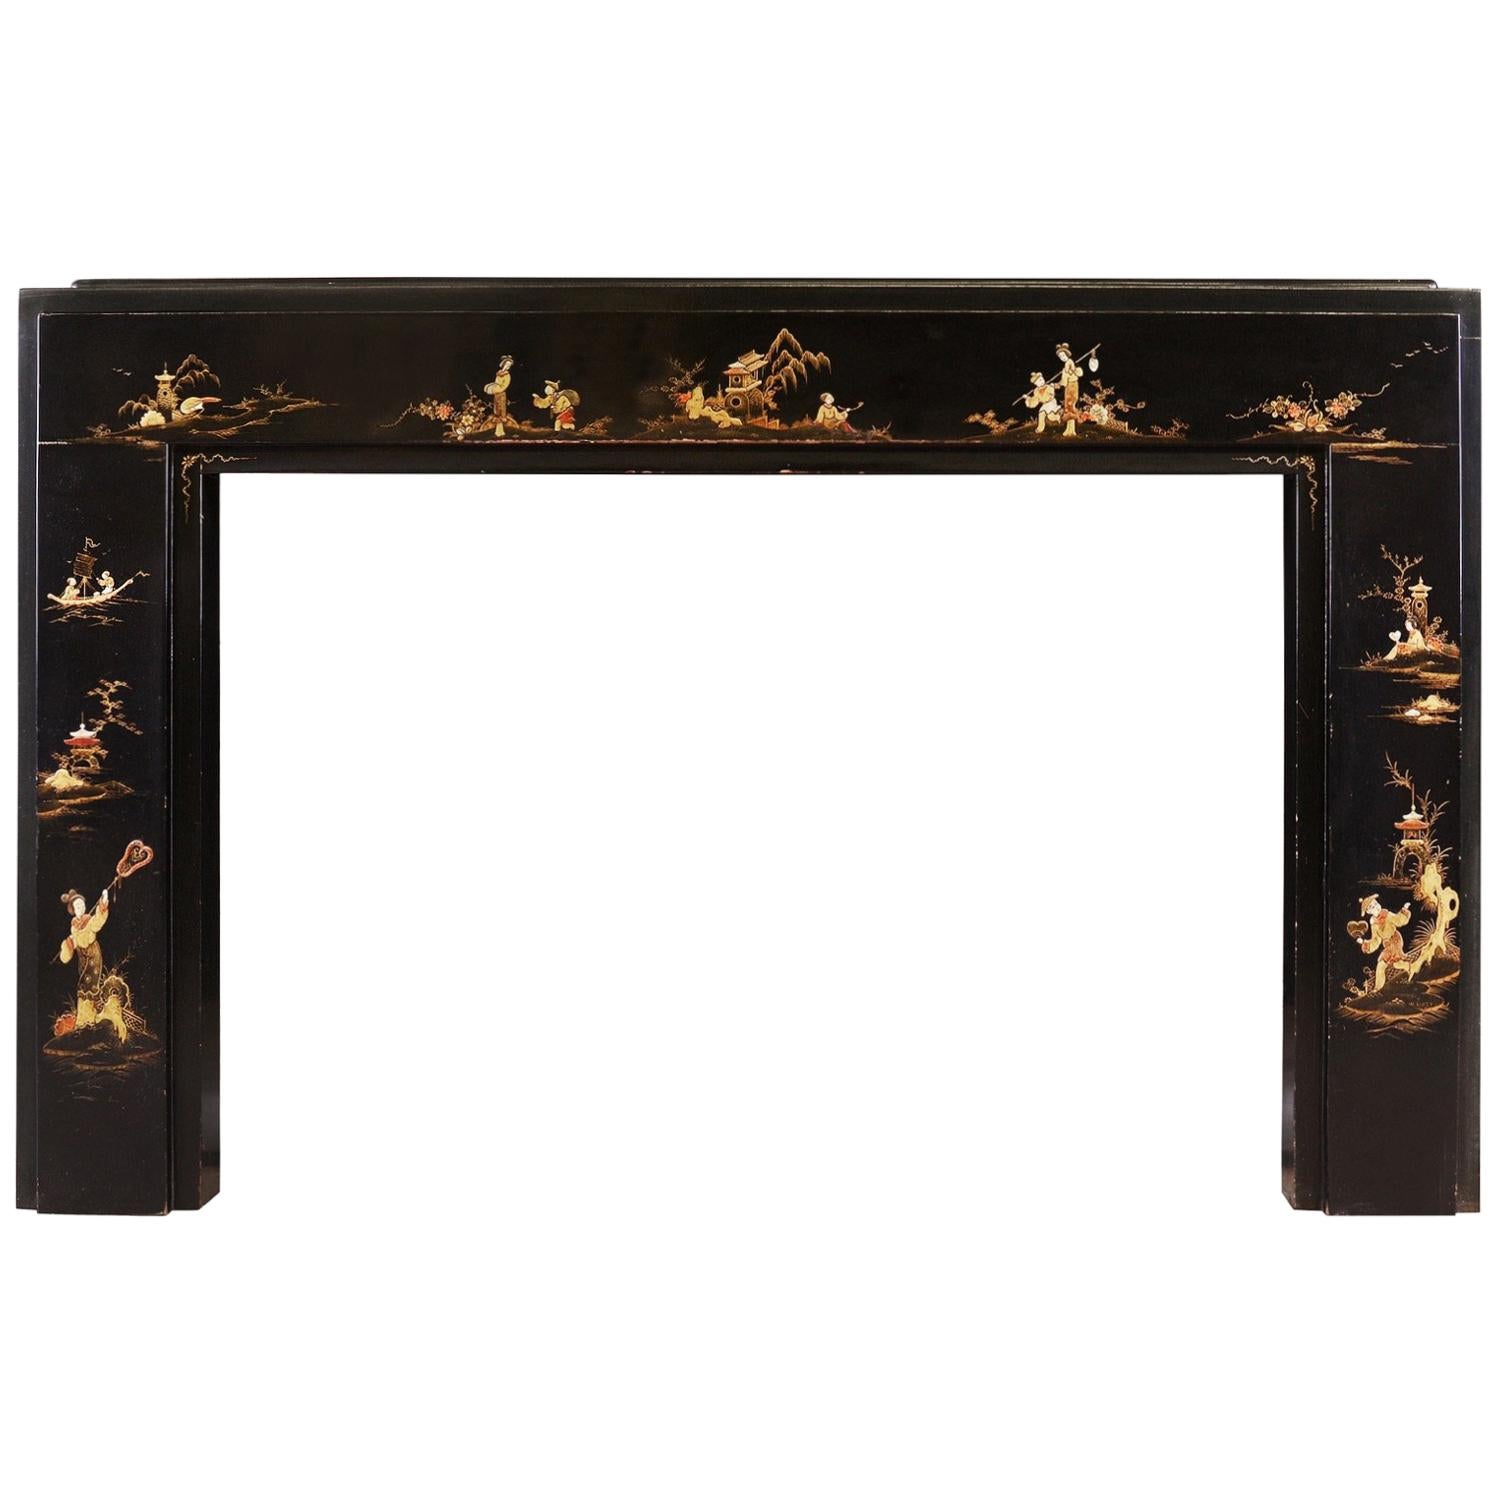 Art Deco Japanned/Chinoiserie Fireplace